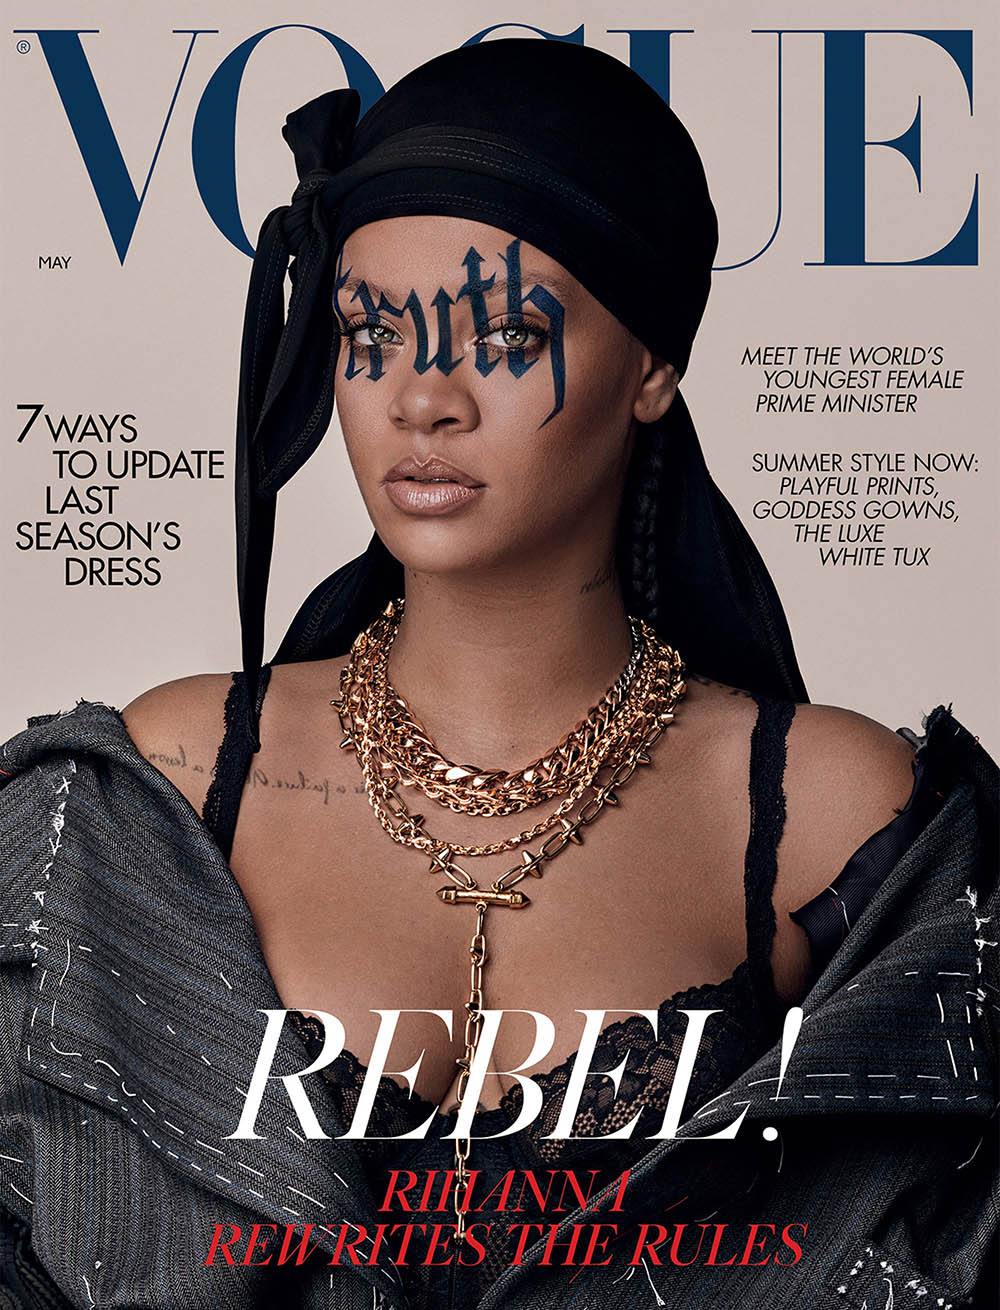 Rihanna covers British Vogue May 2020 by Steven KleinRihanna covers British Vogue May 2020 by Steven Klein